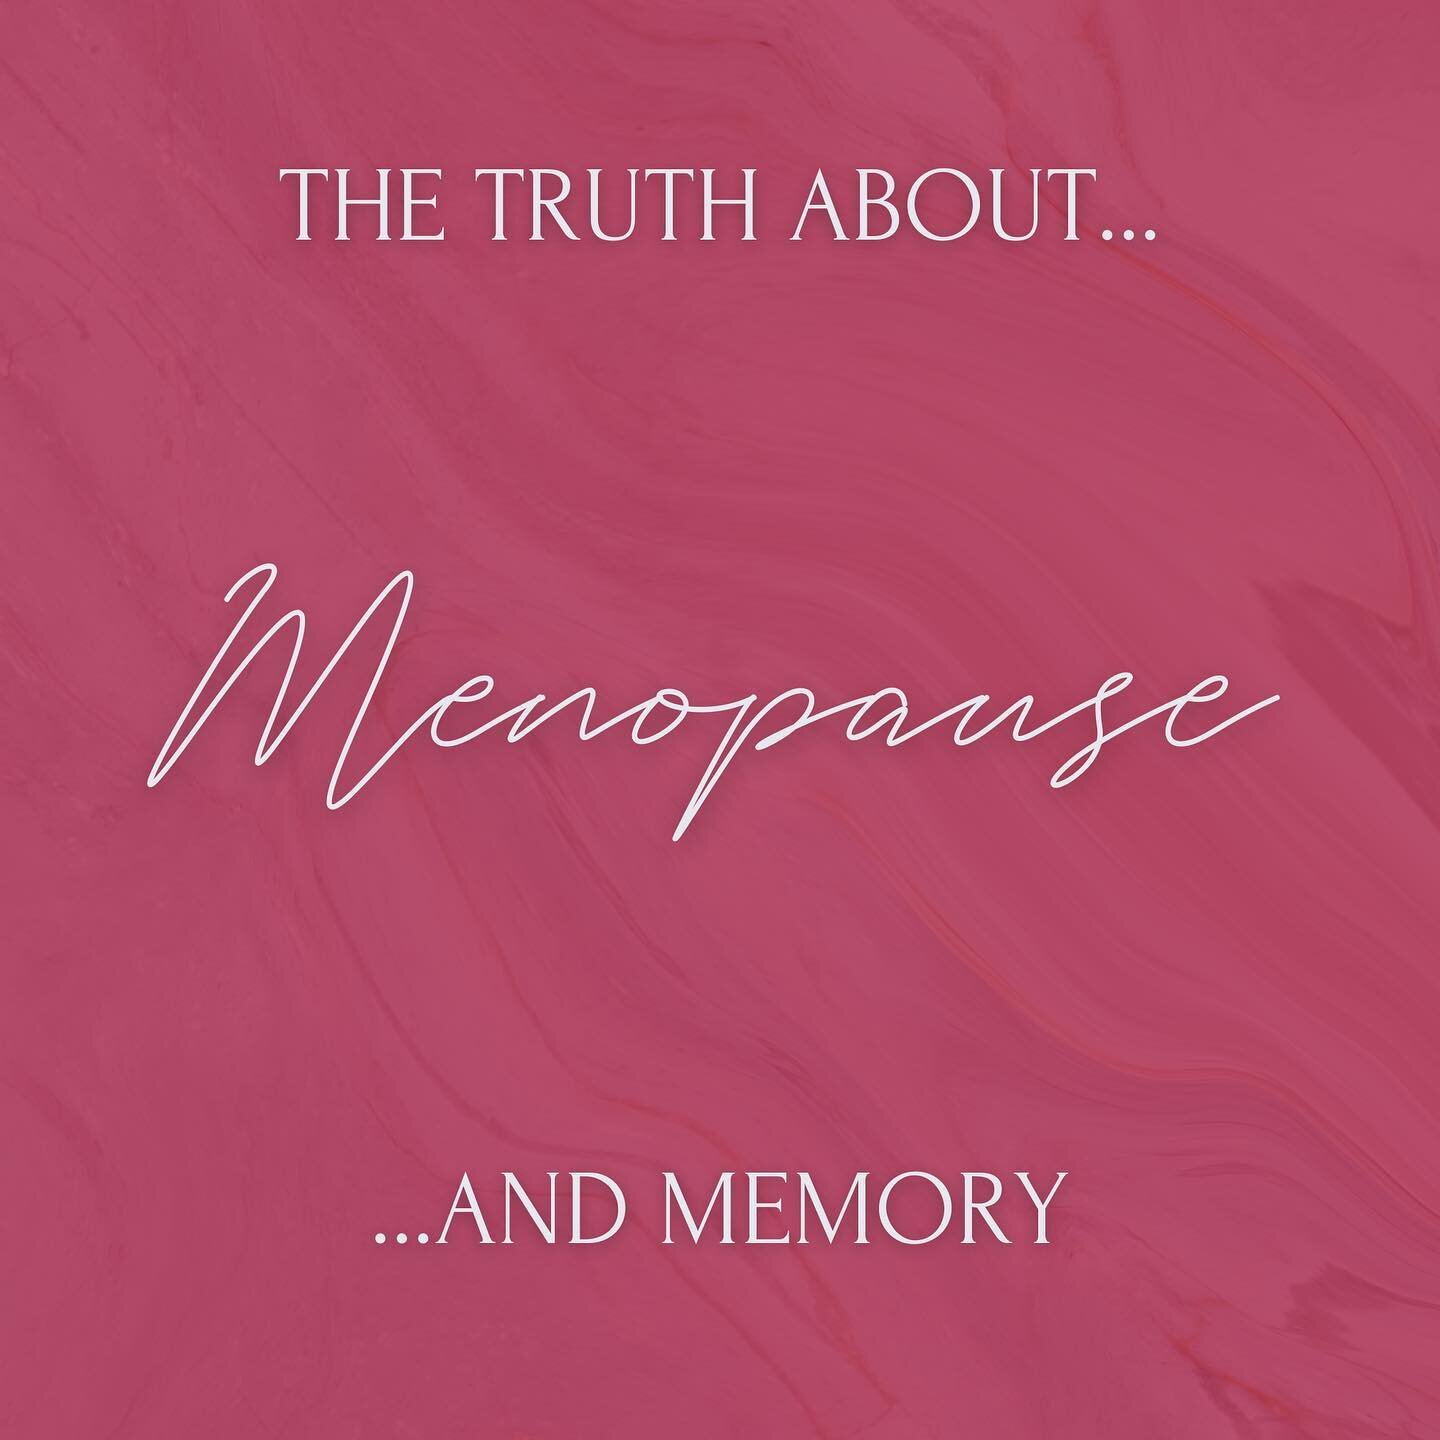 Most women who have experienced menopause will be aware of the dreaded &lsquo;brain fog&rsquo; that can descend on us during this time. Brain fog as a phrase seems fairly innocuous and doesn&rsquo;t actually give the appropriate weight to the situati